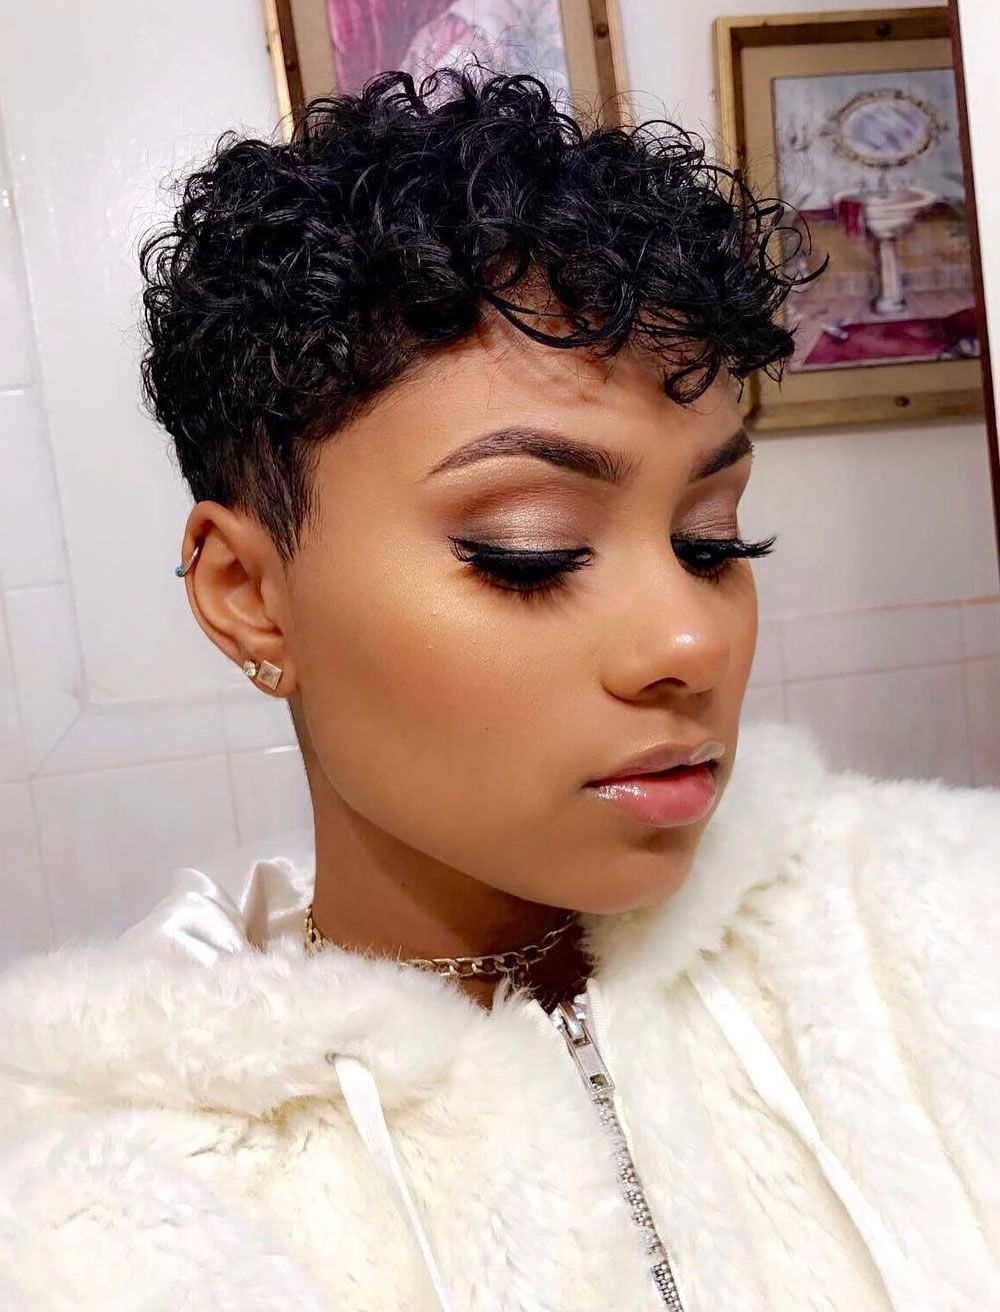 Curly Natural Short Hair Hairstyles For Black Women – Hairstyles With Curly Short Hairstyles For Black Women (Photo 2 of 25)